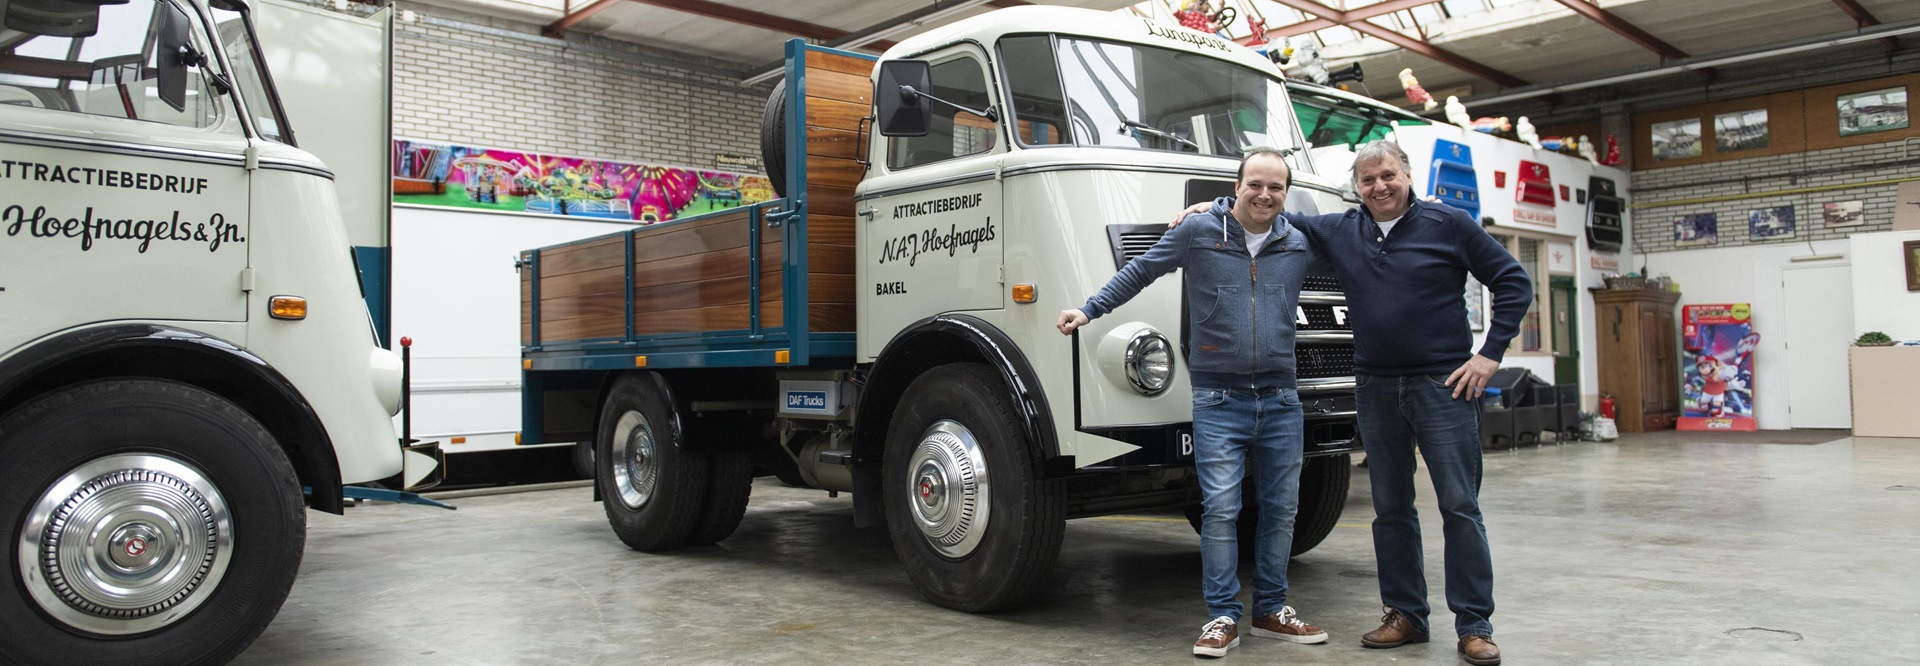 Oldest-DAF-truck-still-in-commercial-use-DAF-A1600-from-1968-main